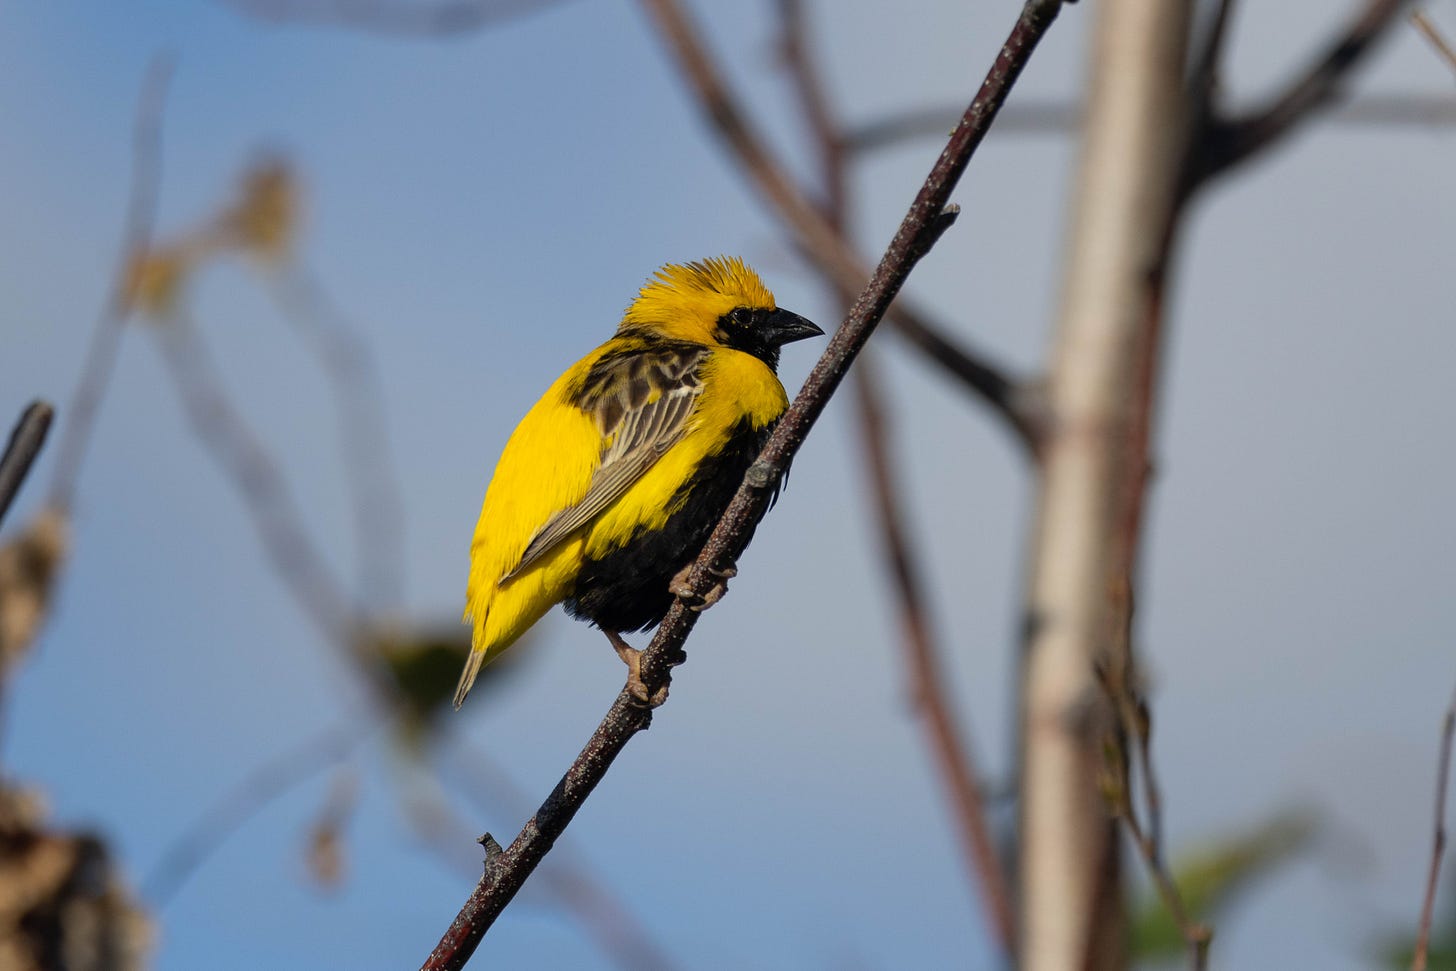 a bright yellow bird with a black face, black belly, and dark patterning on the wings, perching on a near-vertical twig and facing right